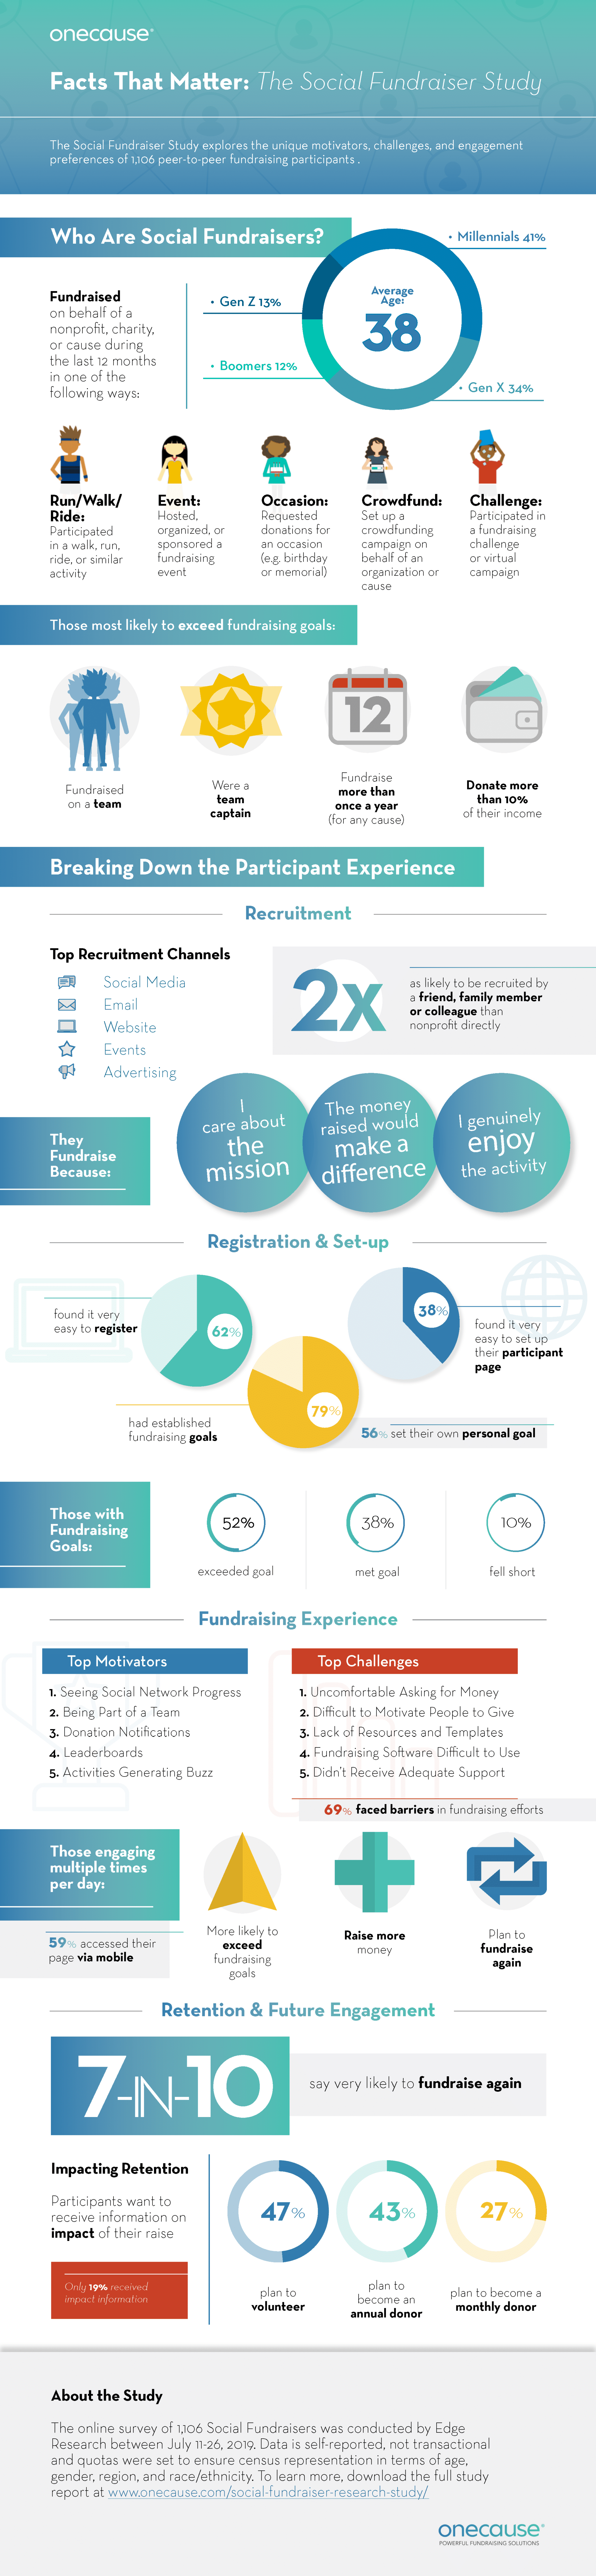 Infographic: Social Fundraiser Research Study